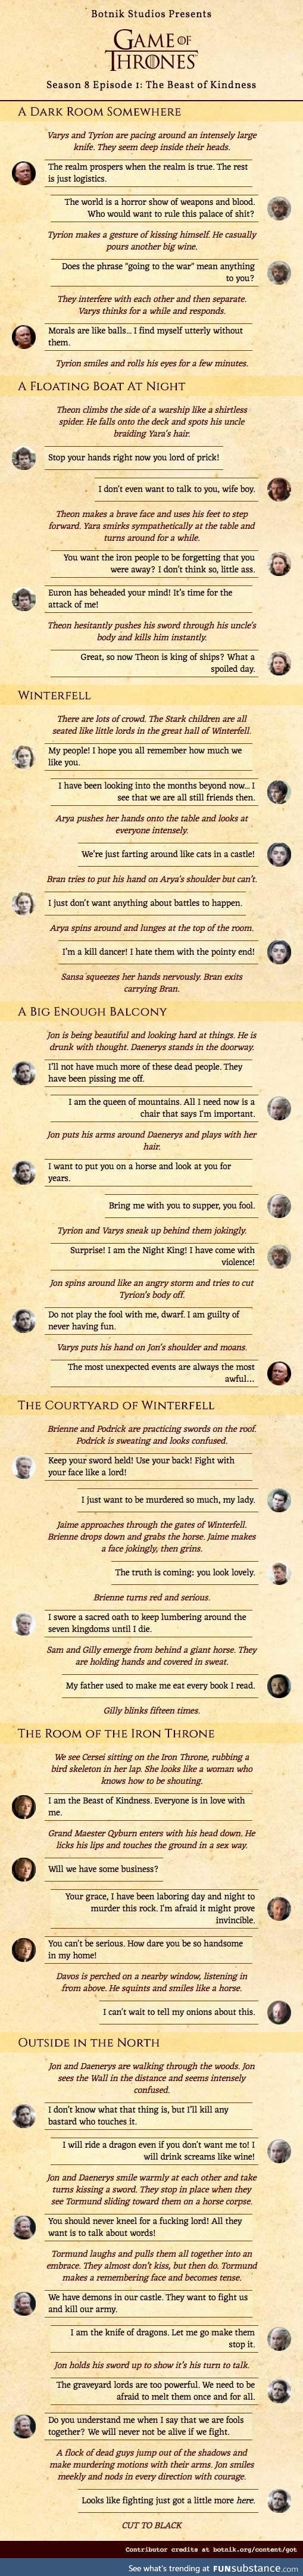 Game of Thrones Script by Botnik predictive keyboard (I can't wait to tell my onions)